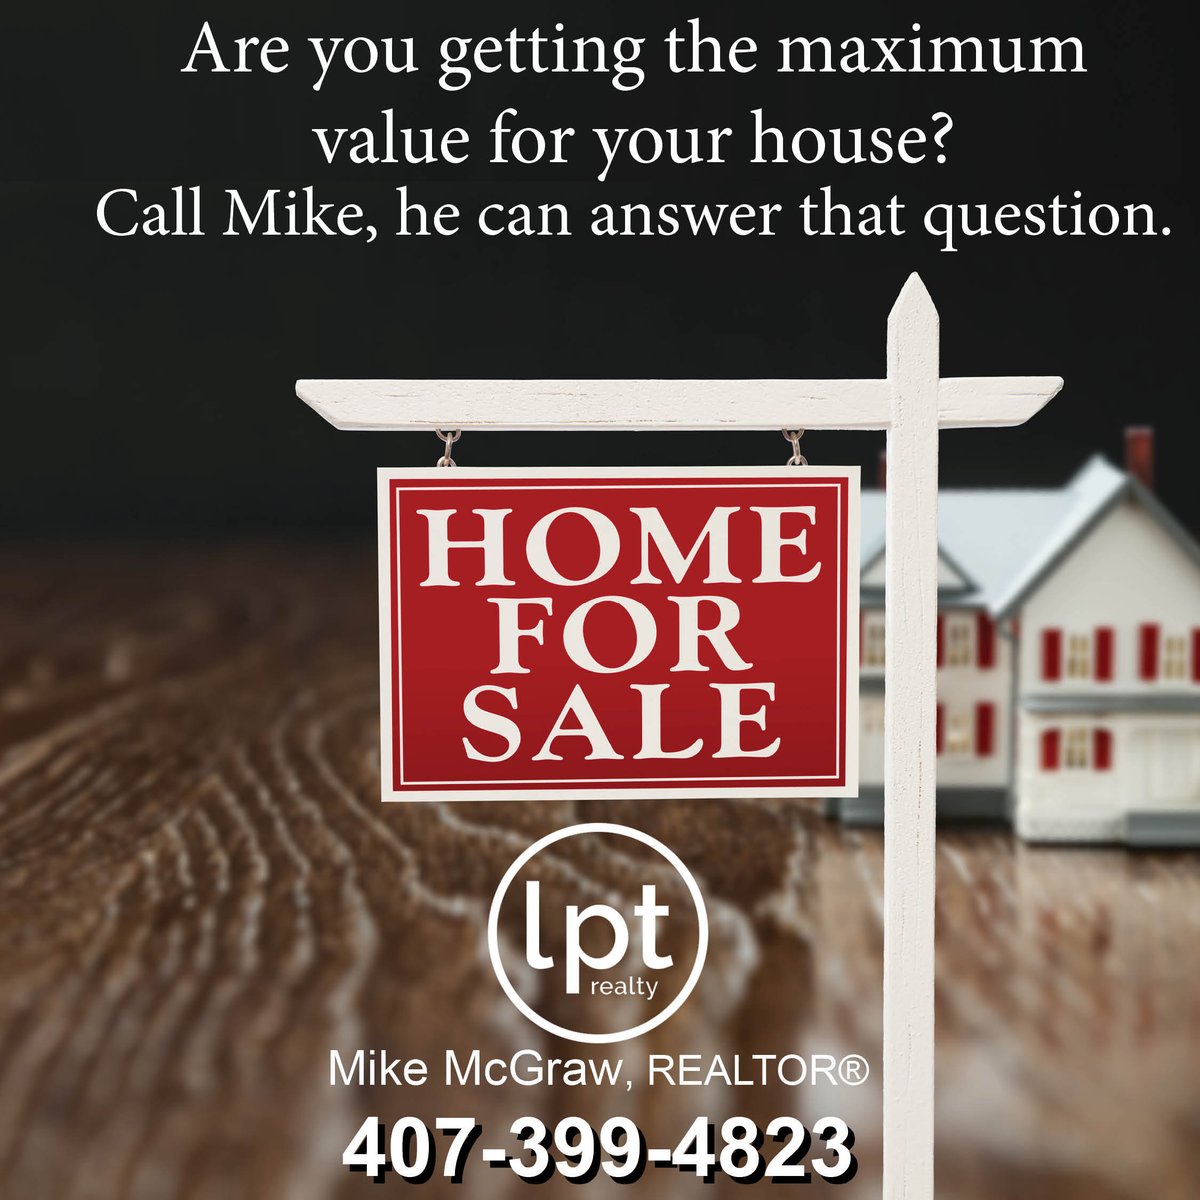 Are you getting the maximum value for your home?
Call or text me at 407-399-4823. I'm ready to get to work for you.

#LPTRealty #LPTRealtyProud #Orlandorealestate #Apopkarealestate #RealEstate #Realtor